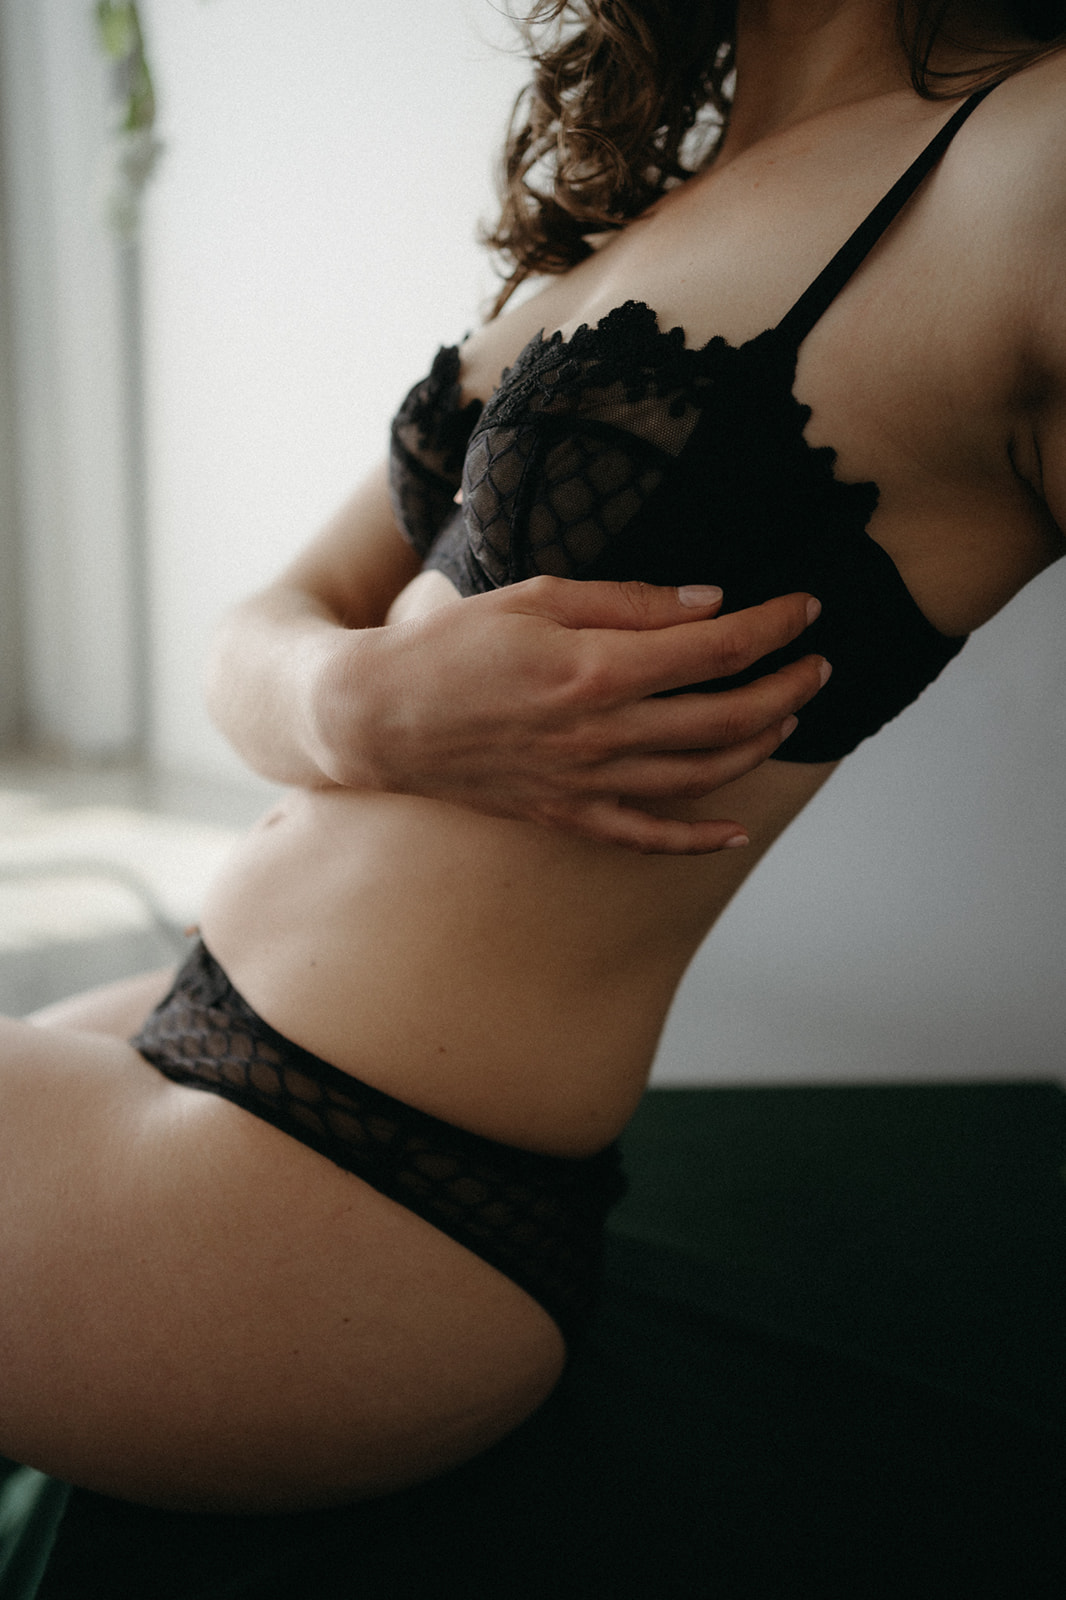 woman in black lace lingerie with her hand on her stomach